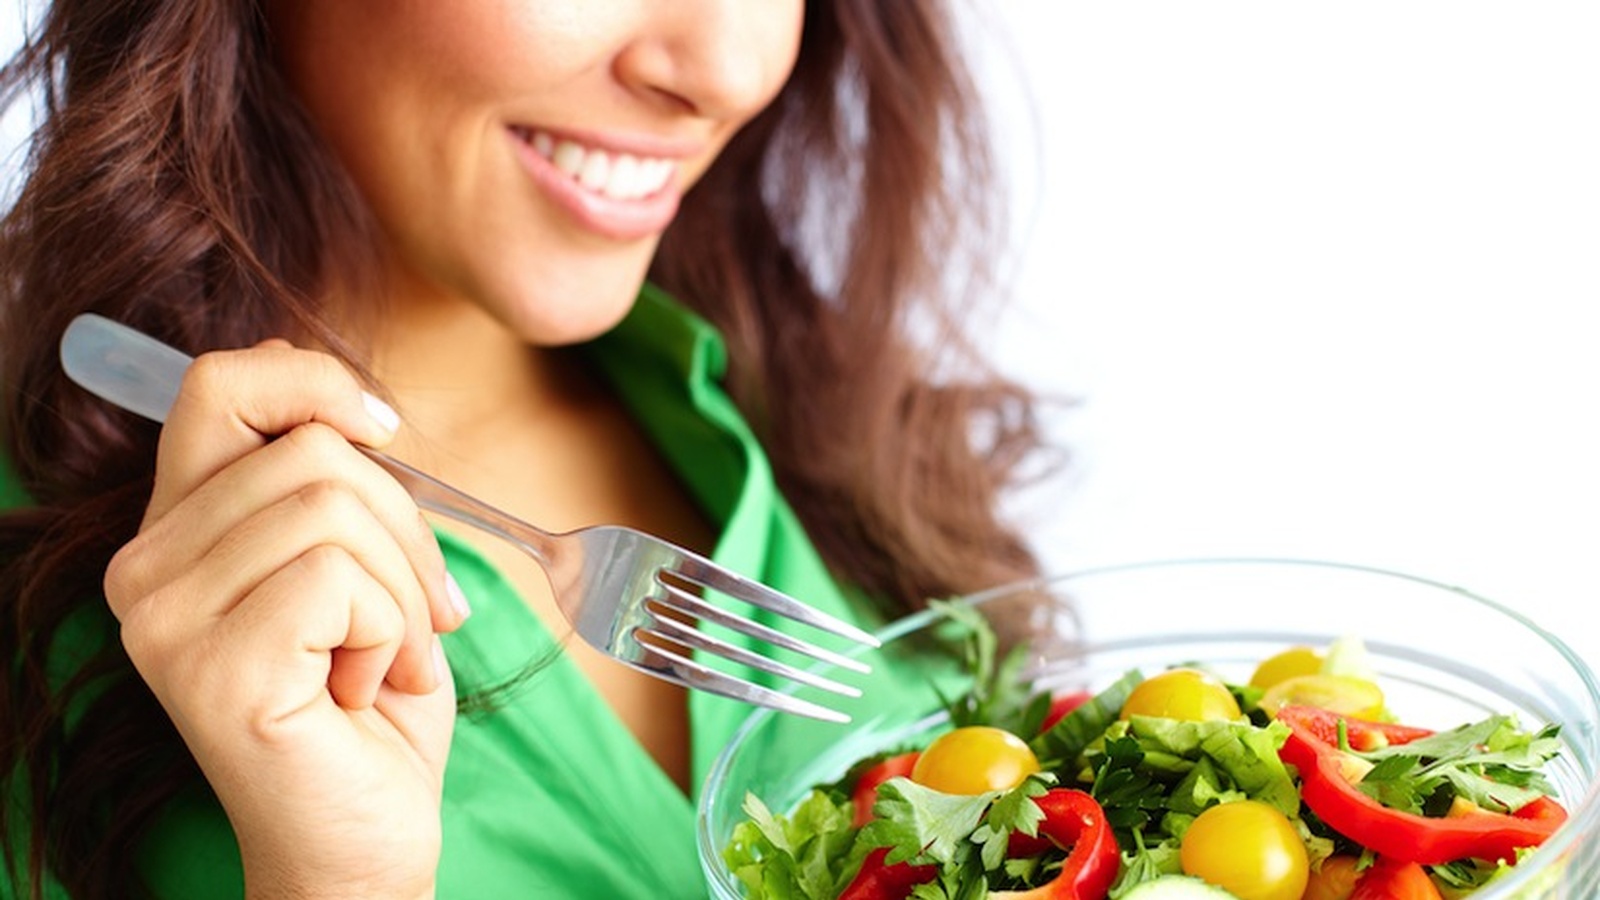 3 Tips to Start Eating Consciously